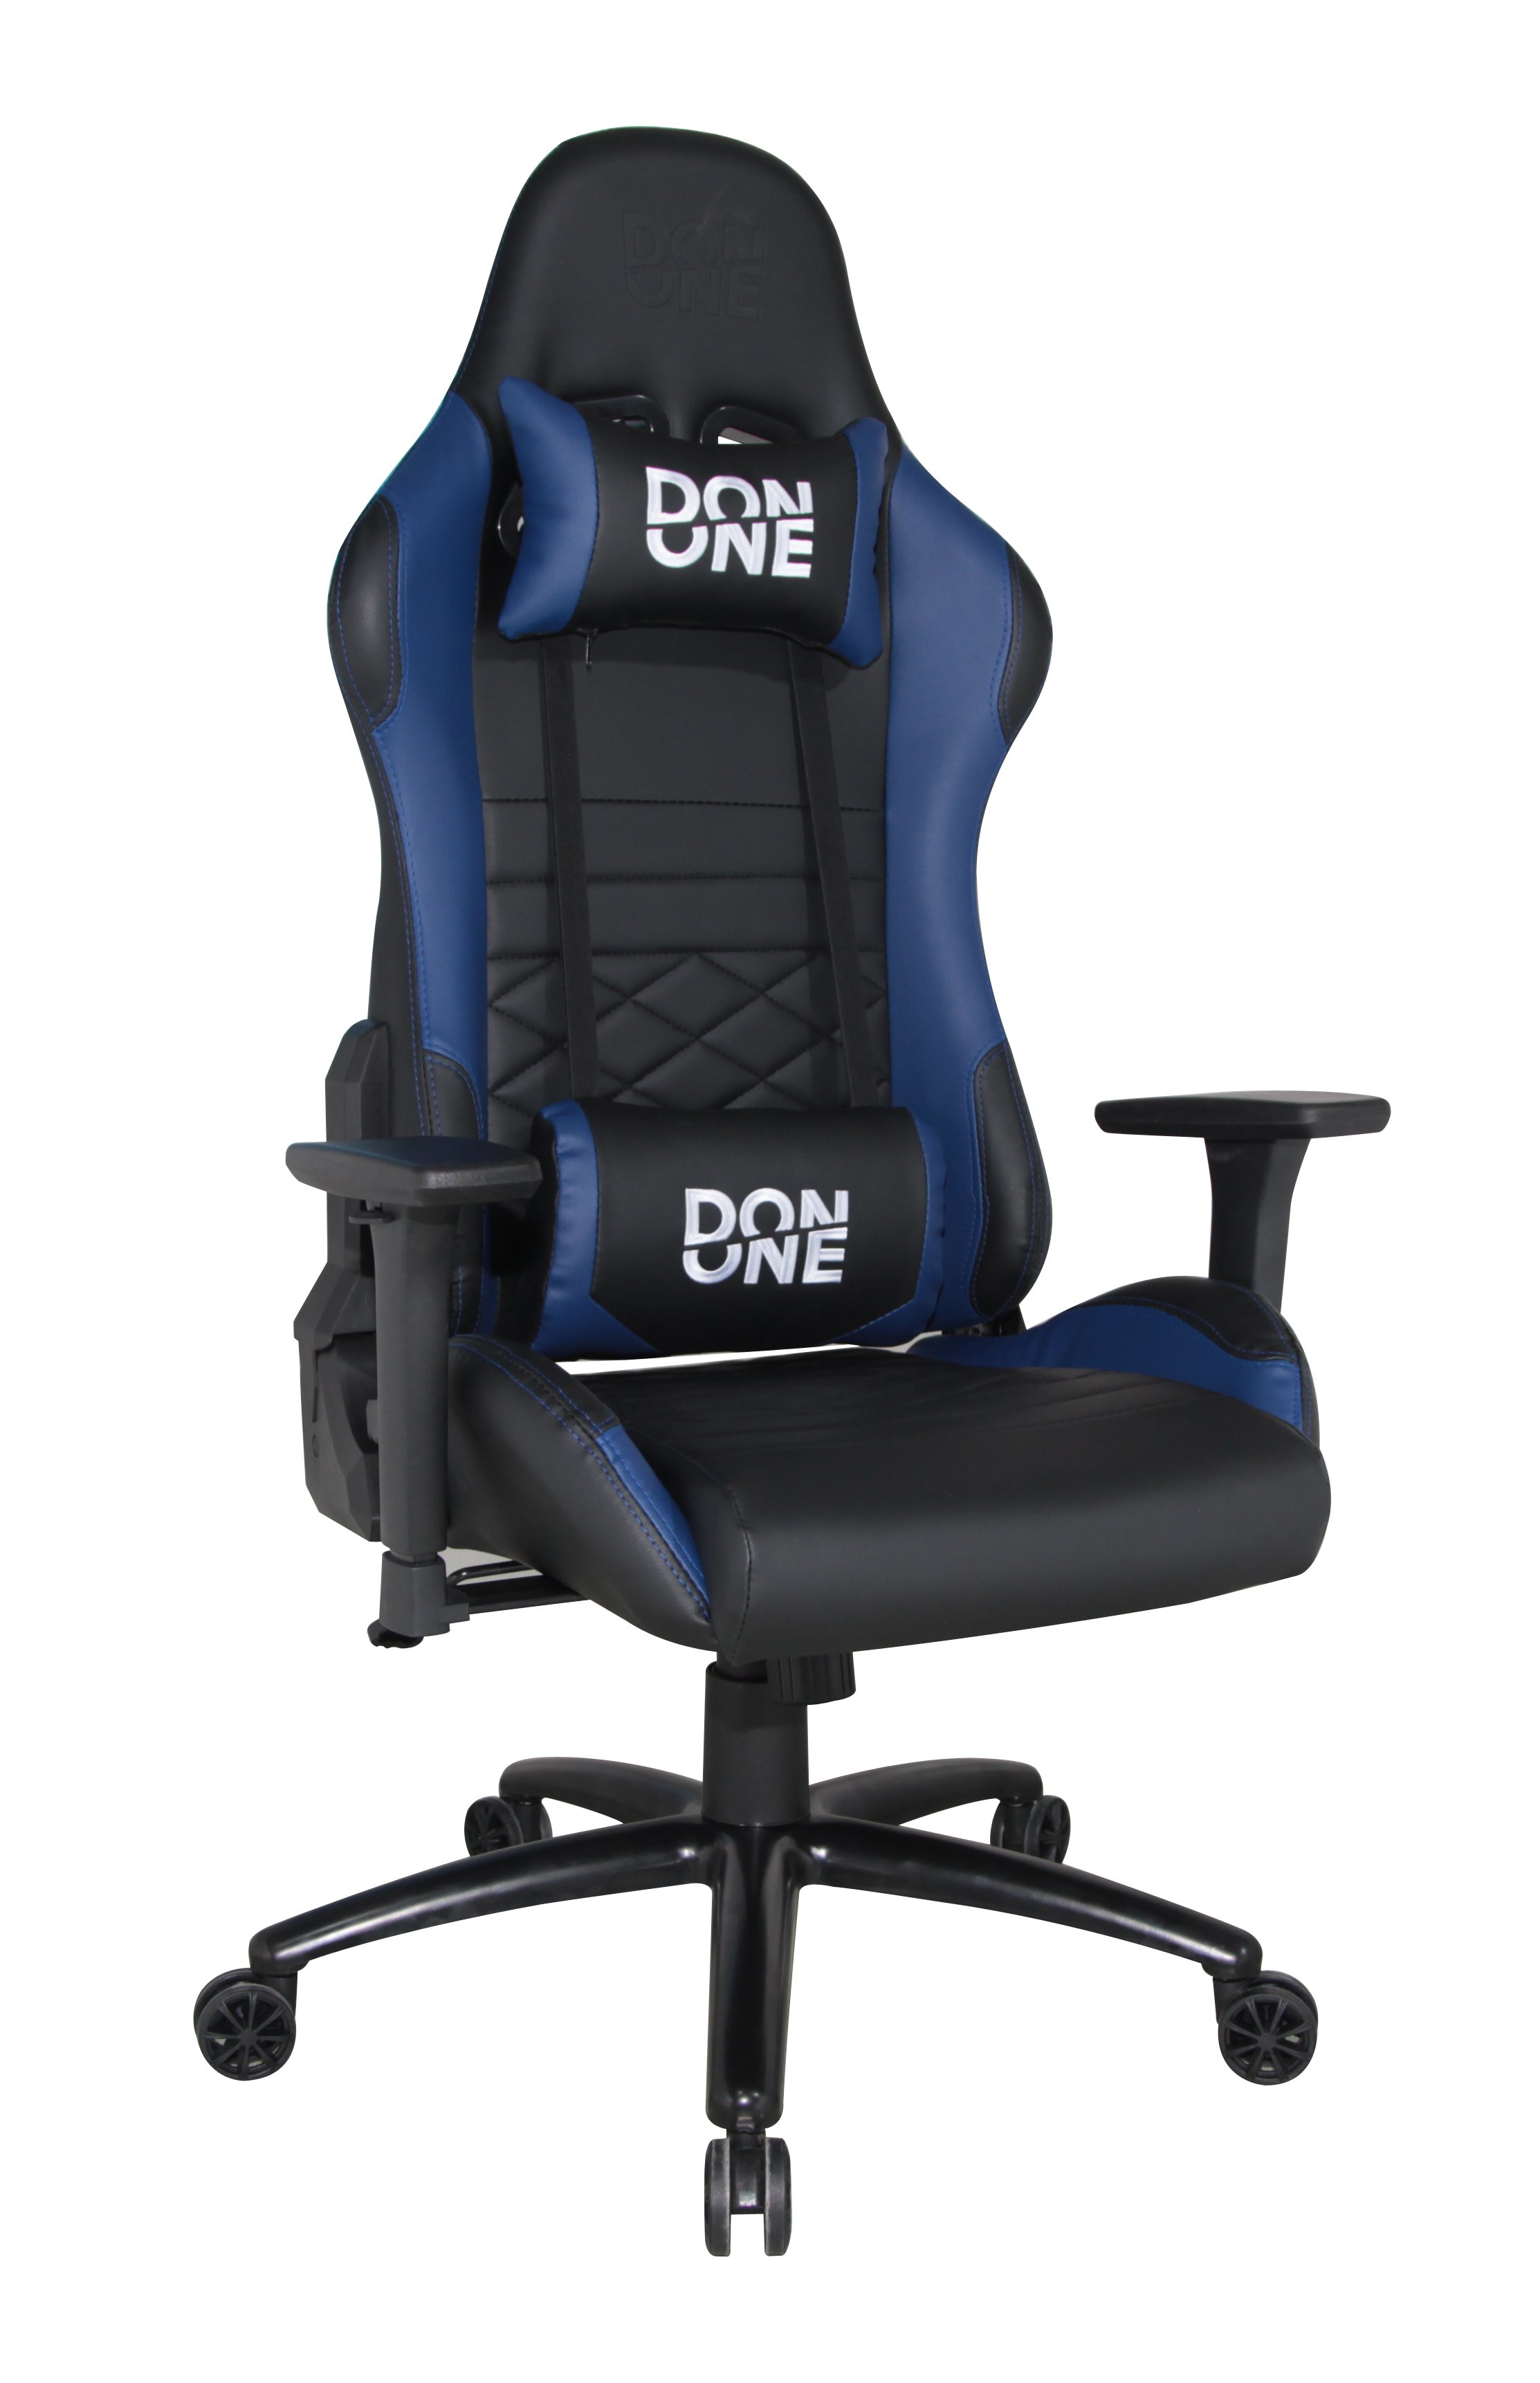 DON ONE -GC300 GAMING CHAIR Black/Blue